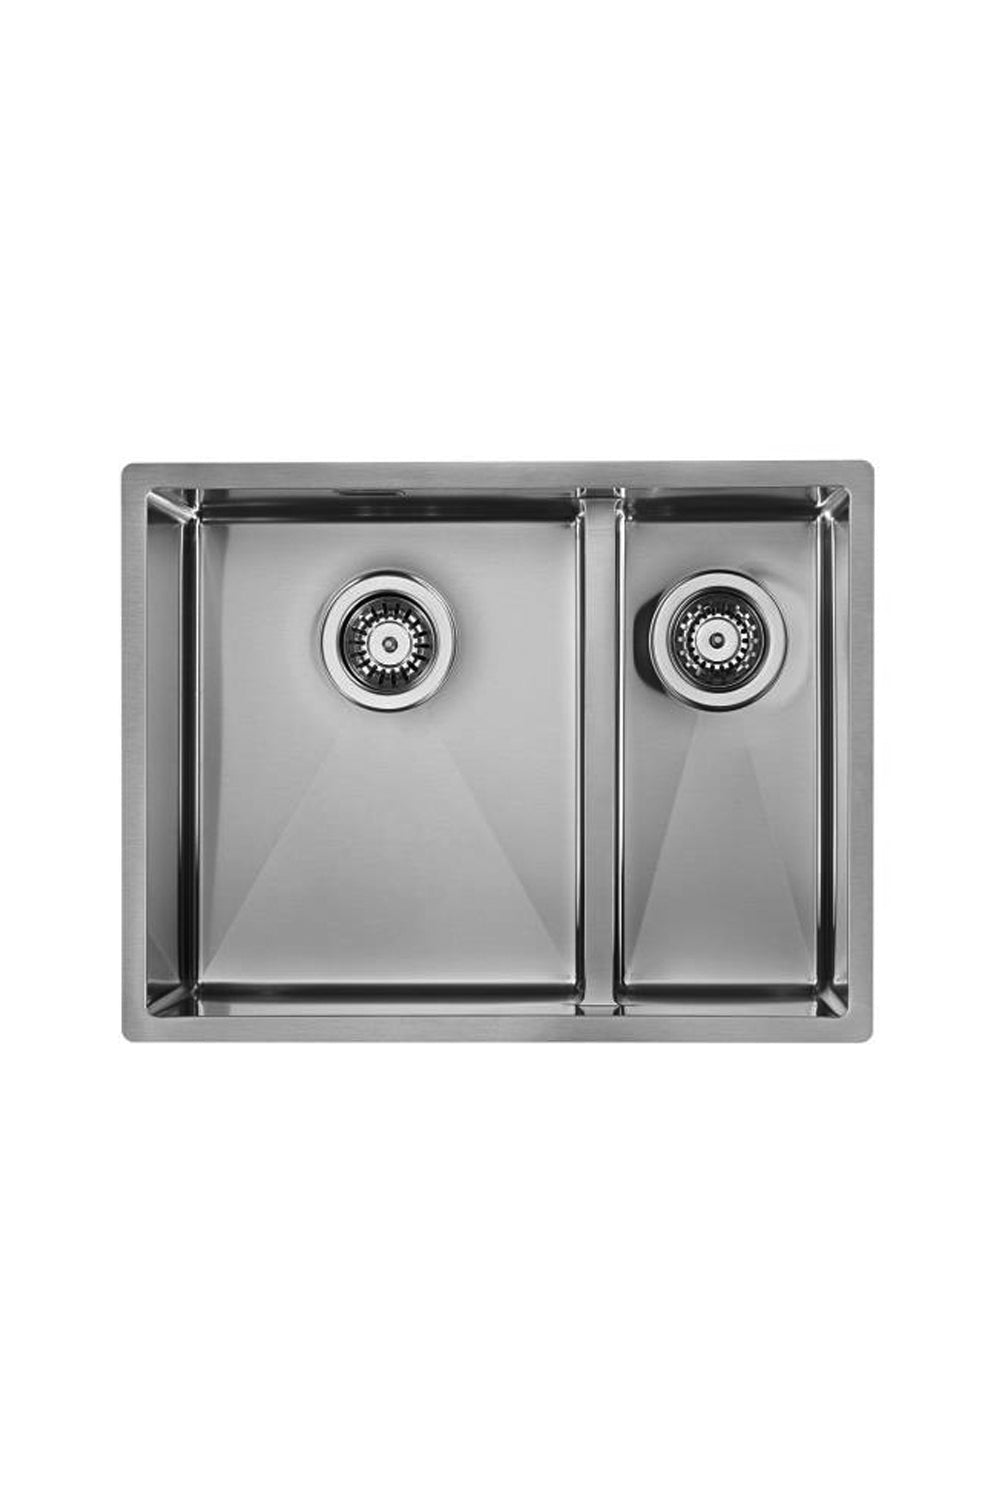 LUISINA 340+180mm R10-Corner Square Stainless Steel Double Sink 意大利製造小圓角方形不銹鋼廚房雙星盆 | Made in Italy |